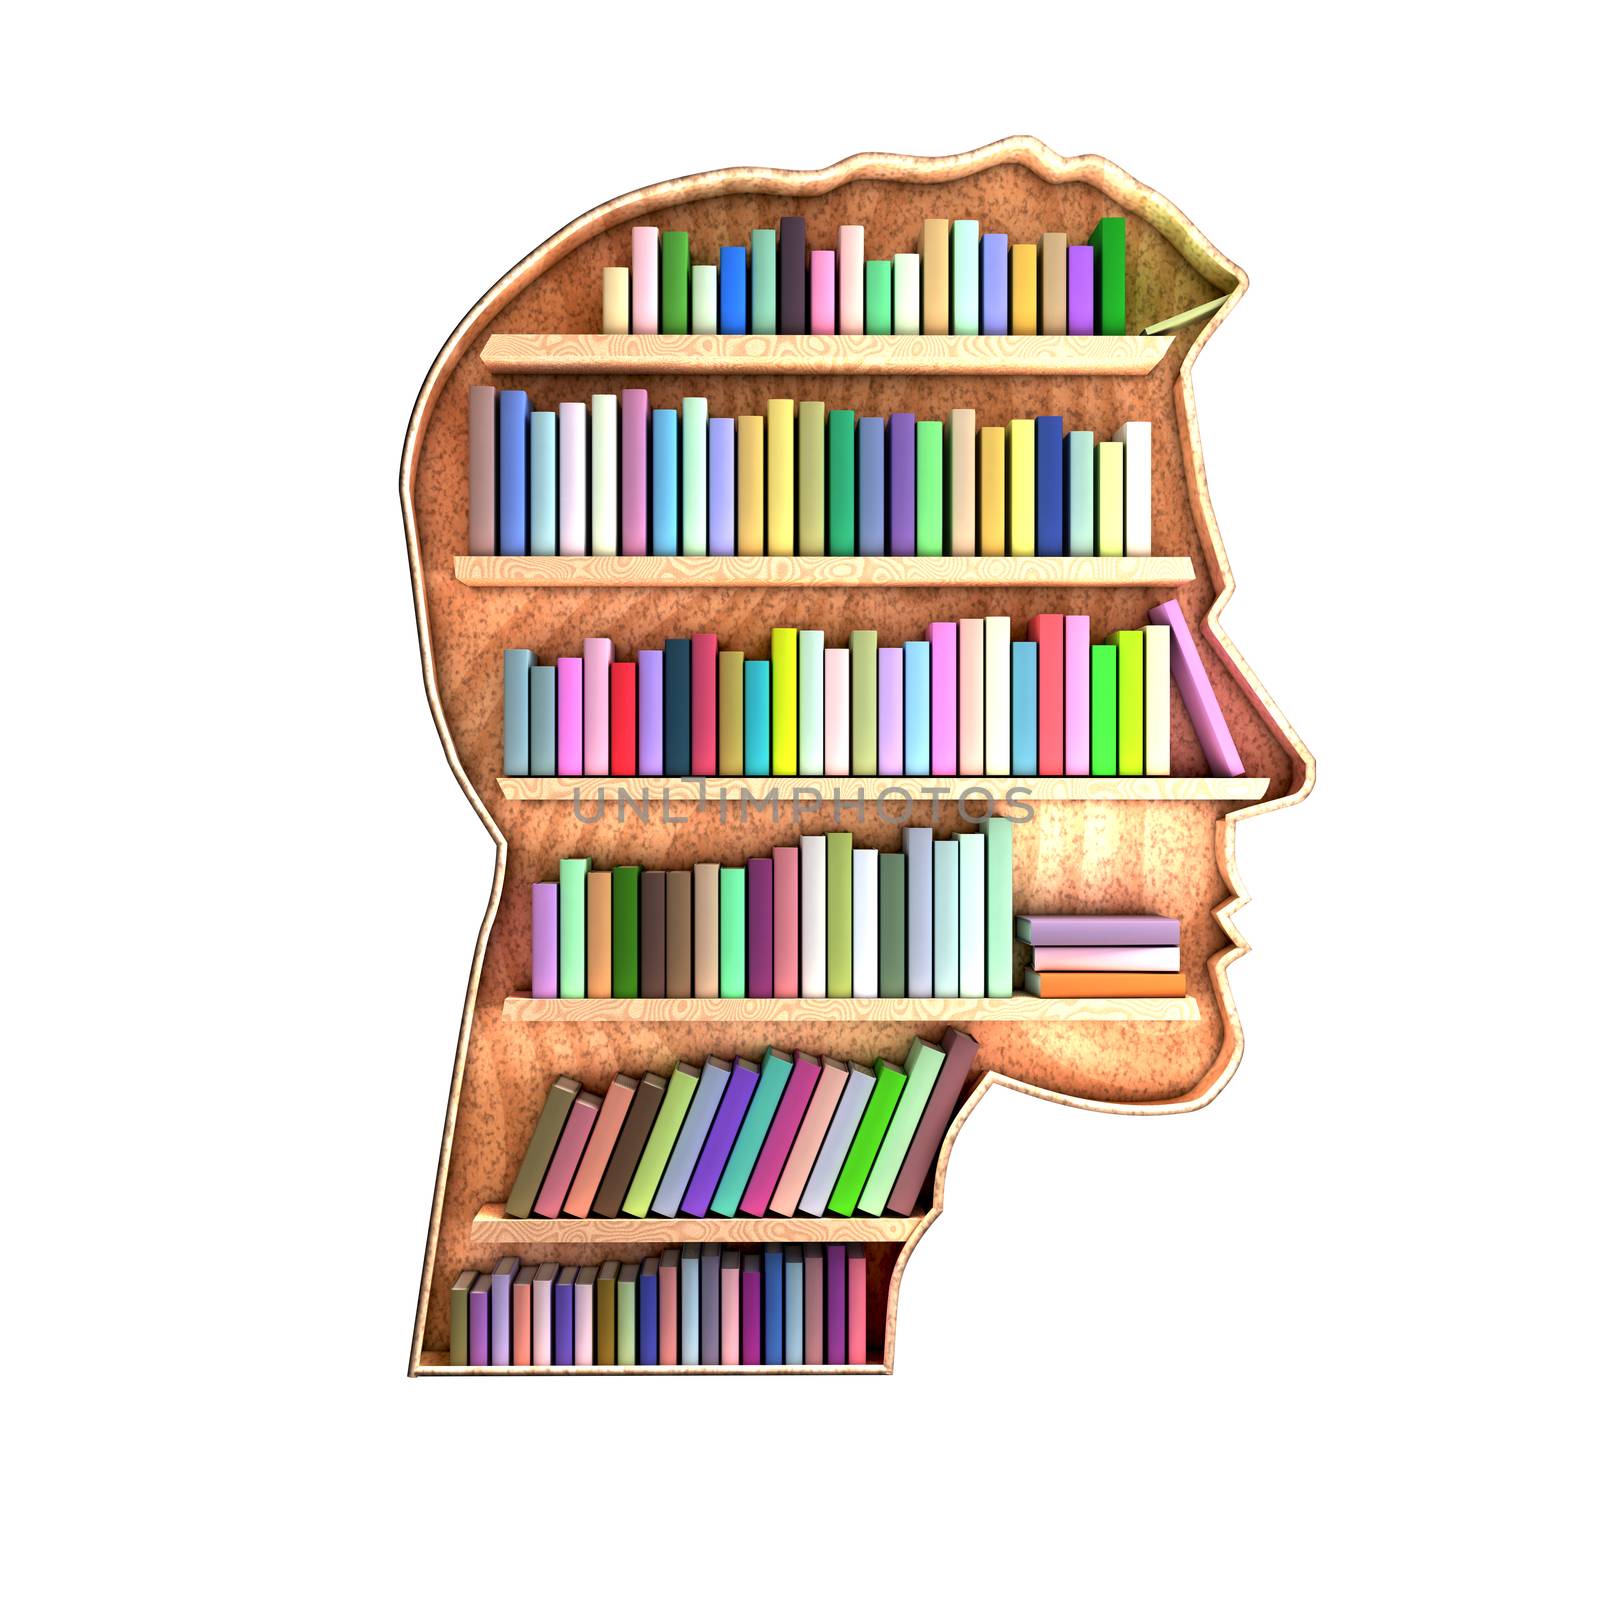 Head shaped library containing books on shelves. Brain concept. Informations are stored and organized. 3D Rendering